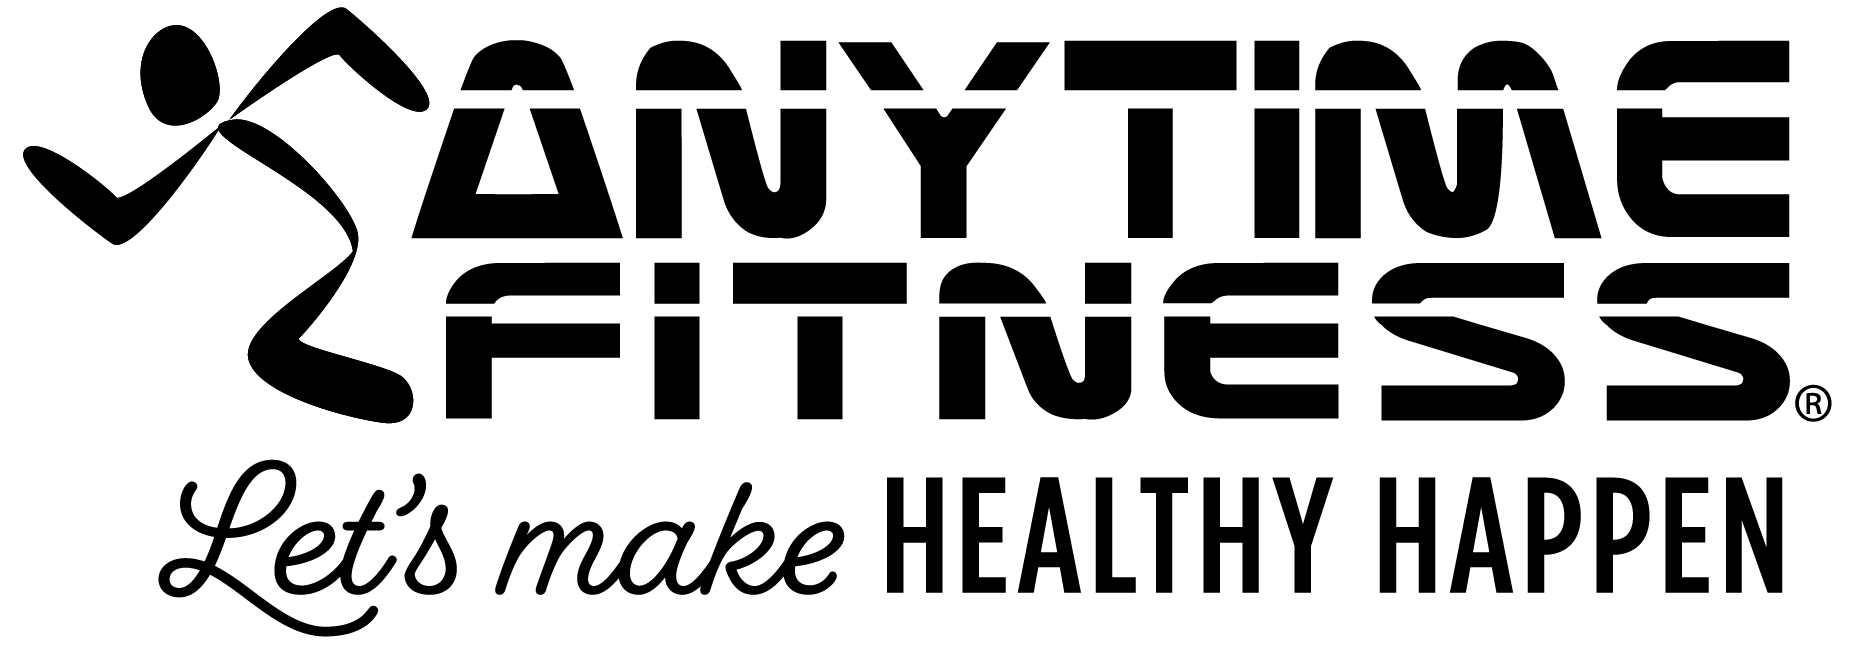 Anytime Fitness Site Criteria Form